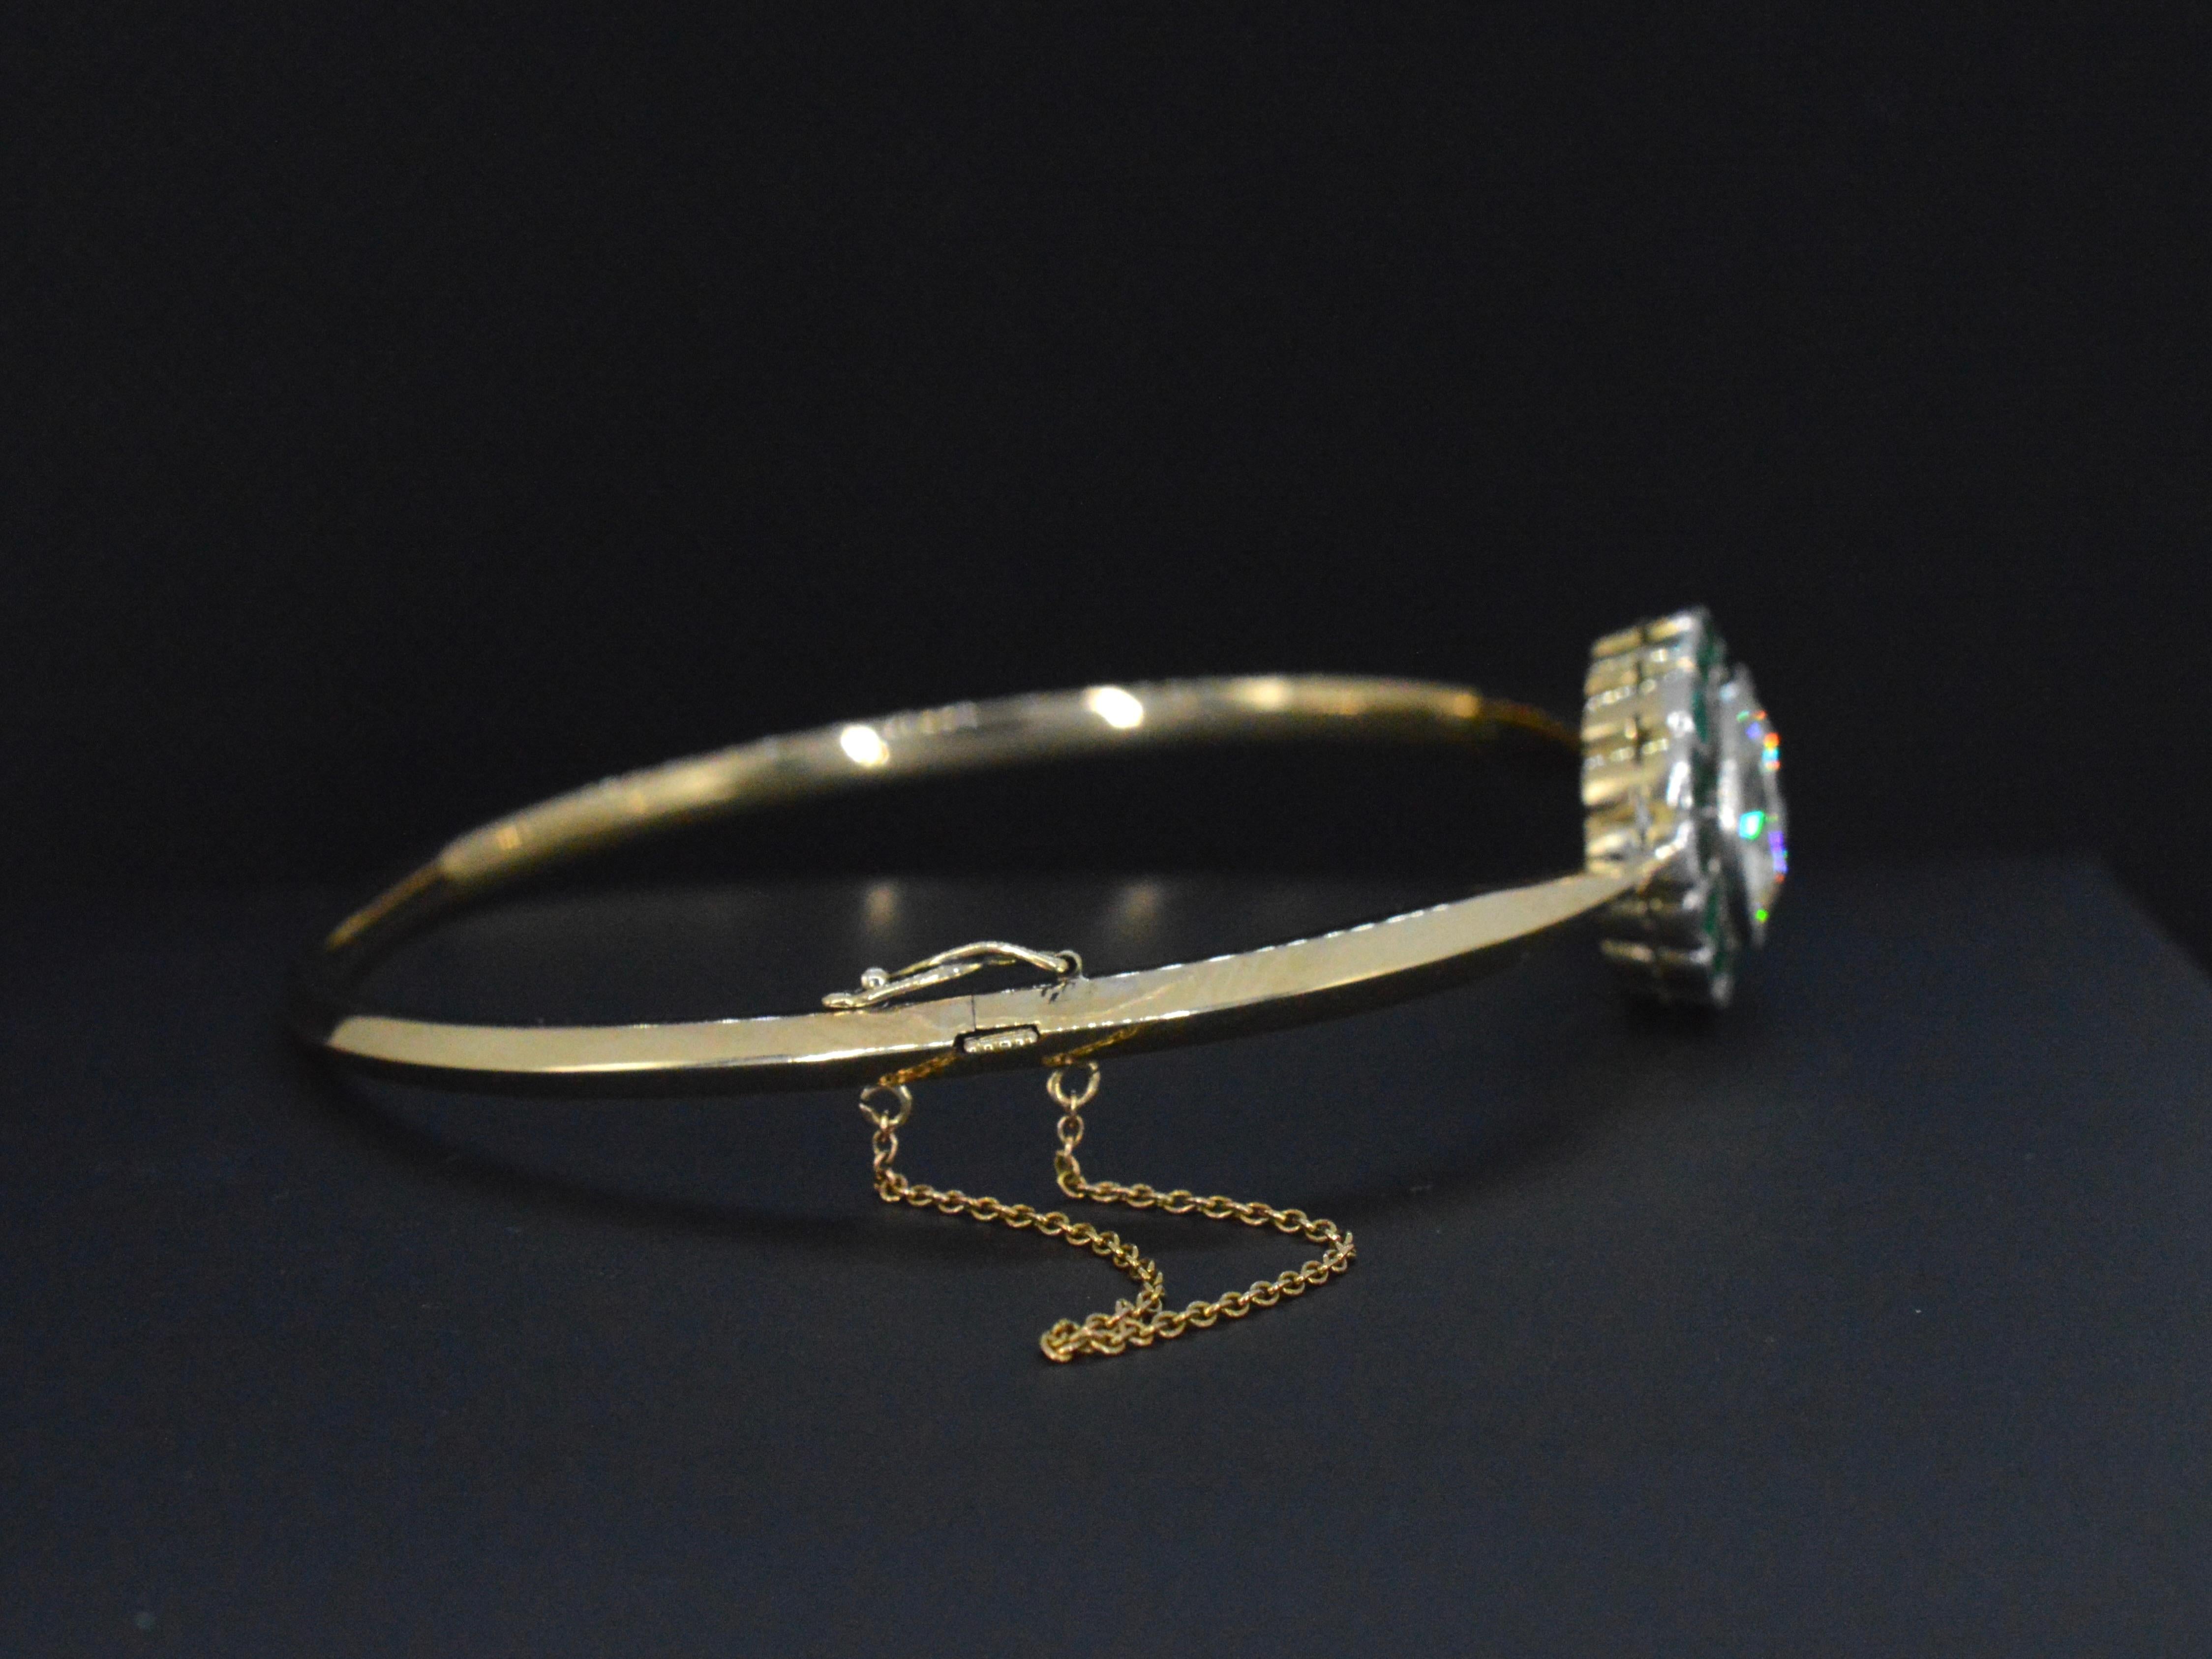 Round Cut Golden bracelet with diamonds and emeralds